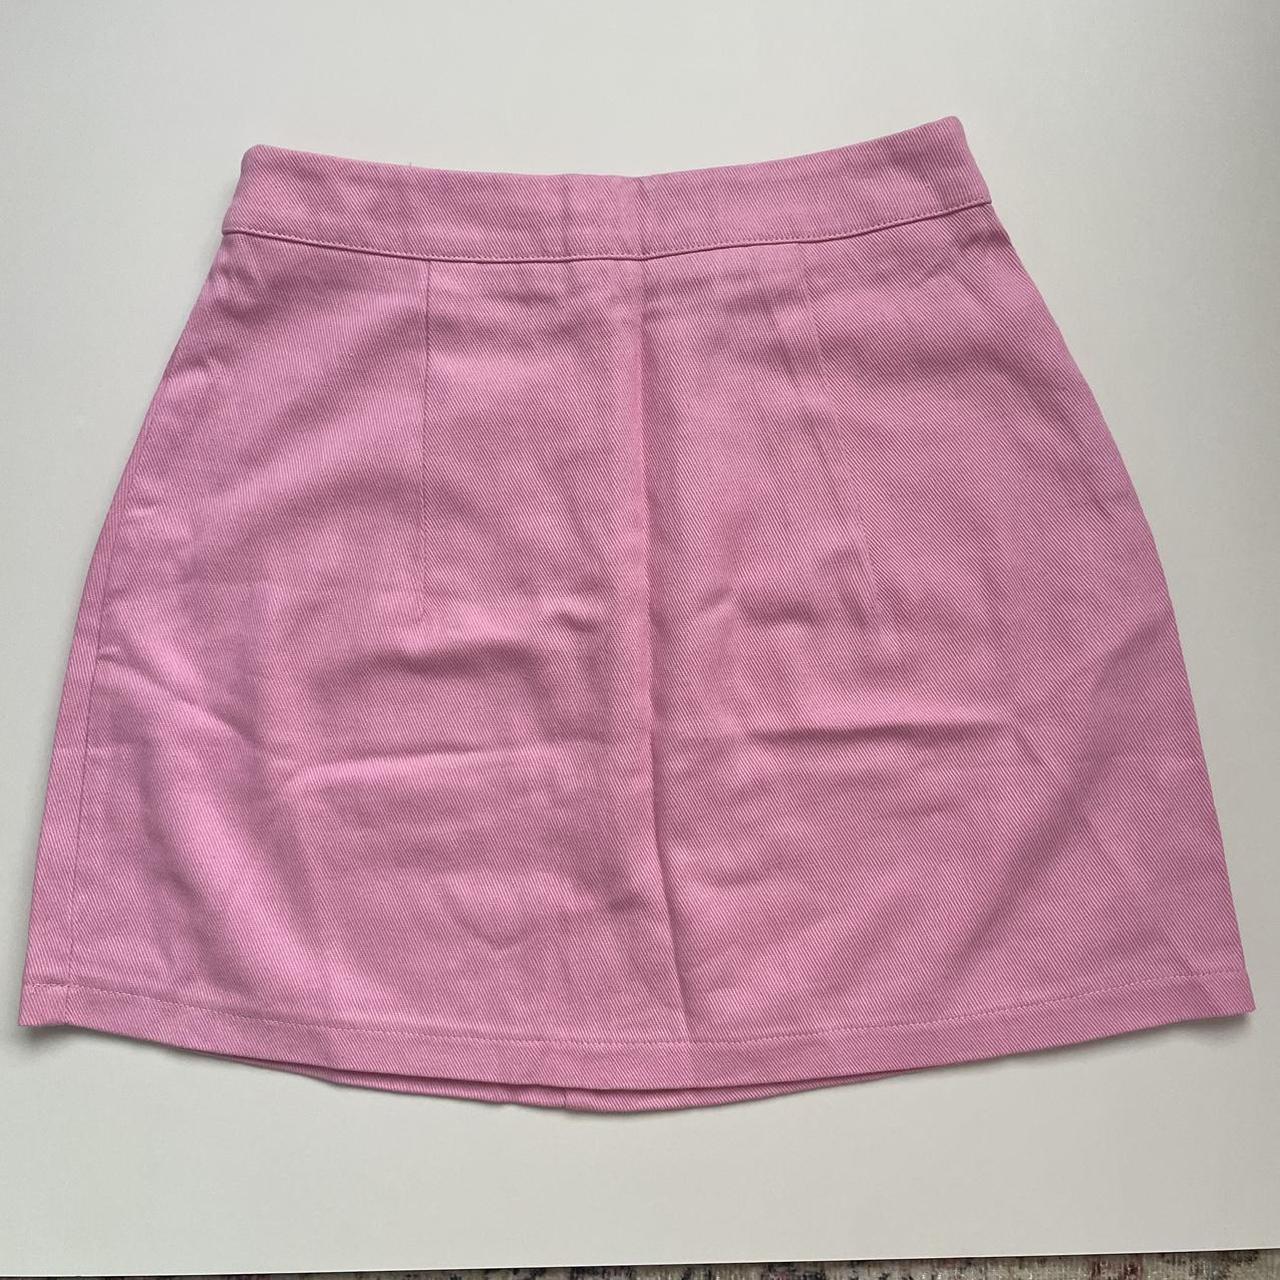 Princess Polly pink mini skirt. Perfect for a party... - Depop